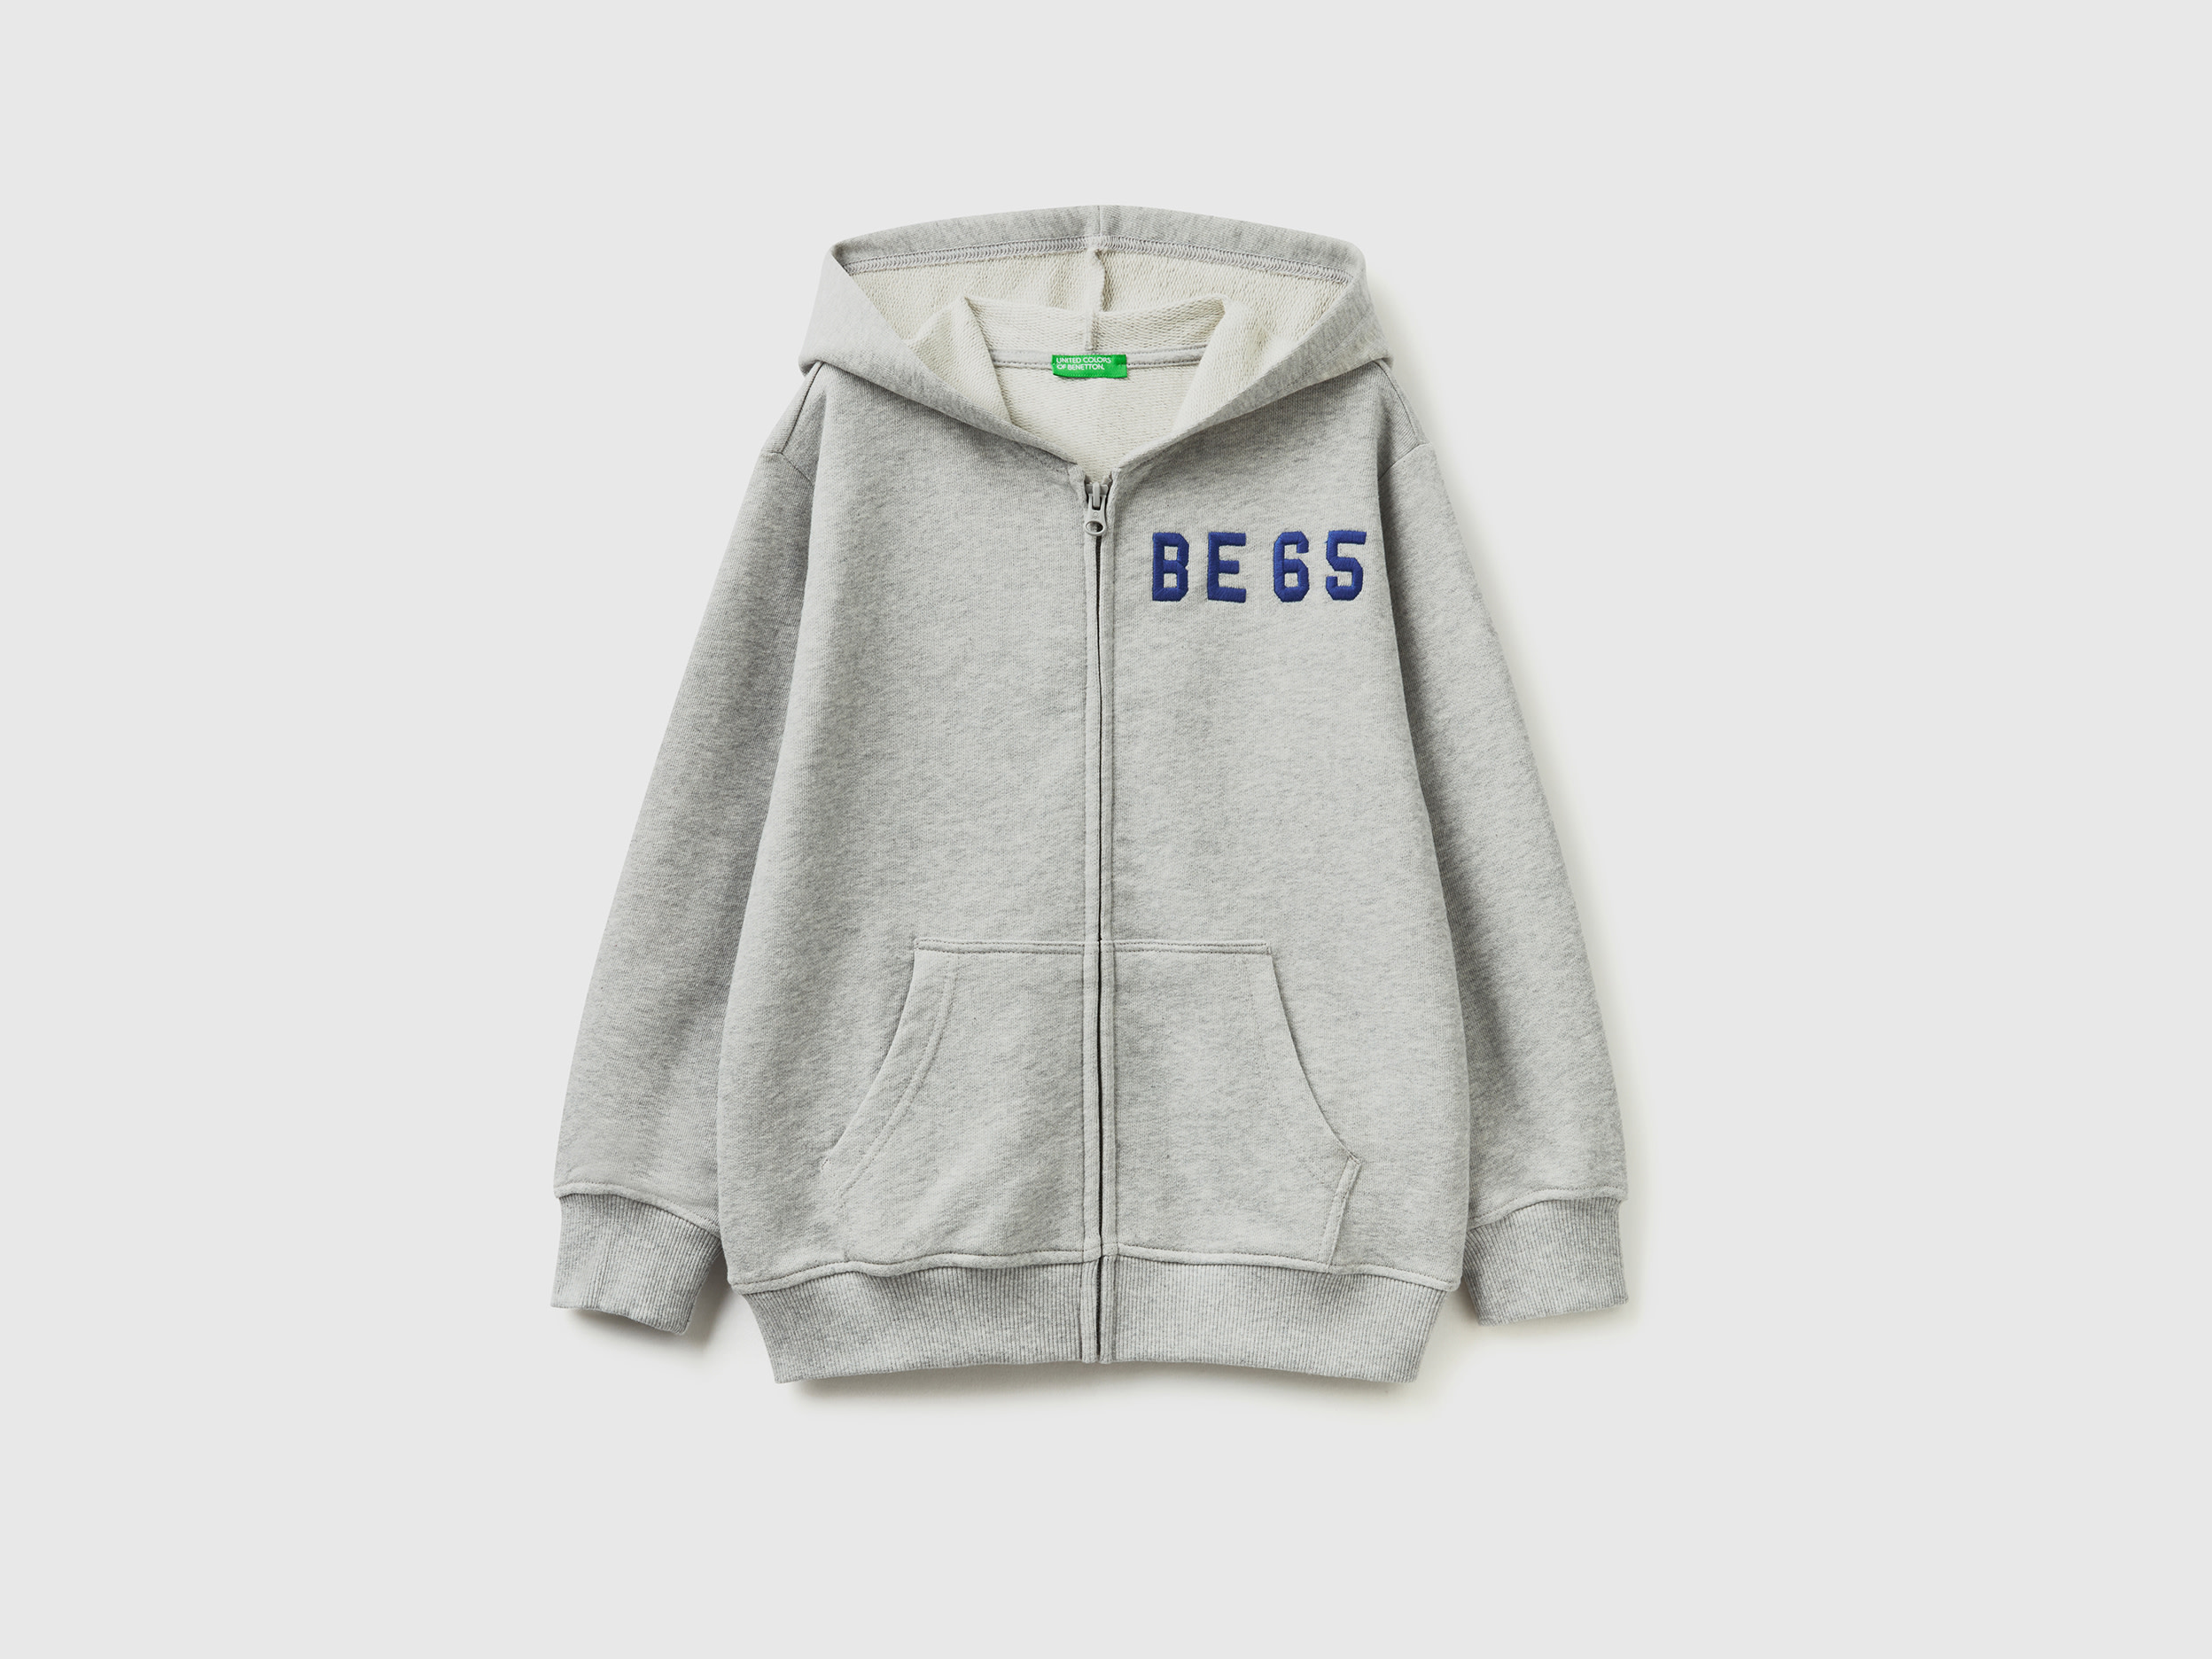 Benetton, Hoodie With Zip And Embroidered Logo, size L, Light Gray, Kids